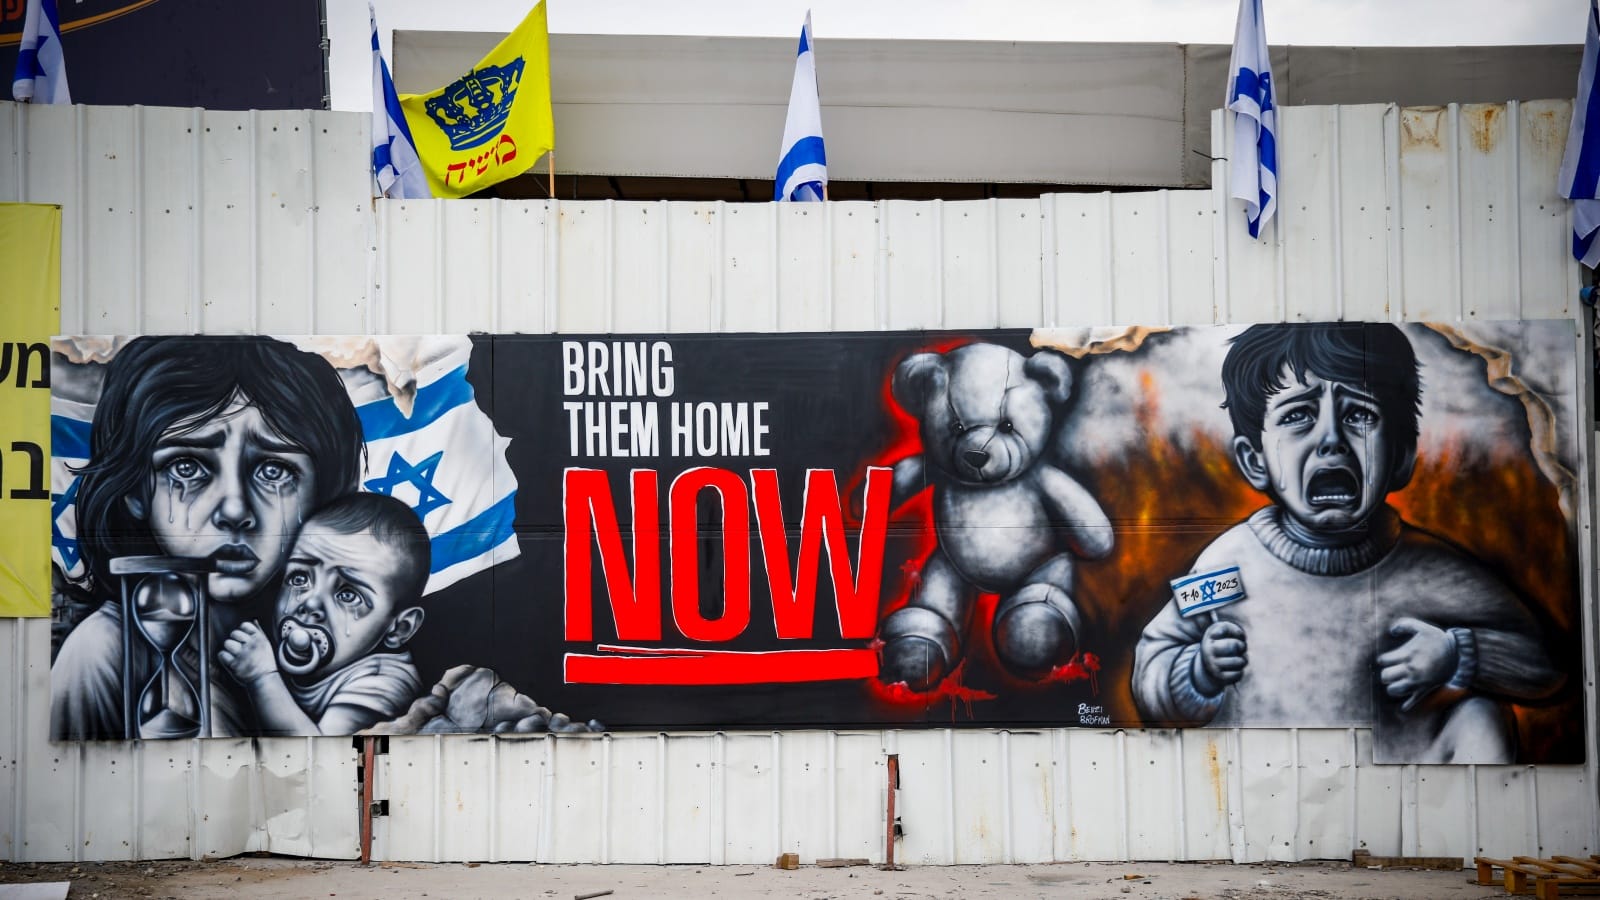 Israeli artists channel grief into poignant creations - ISRAEL21c